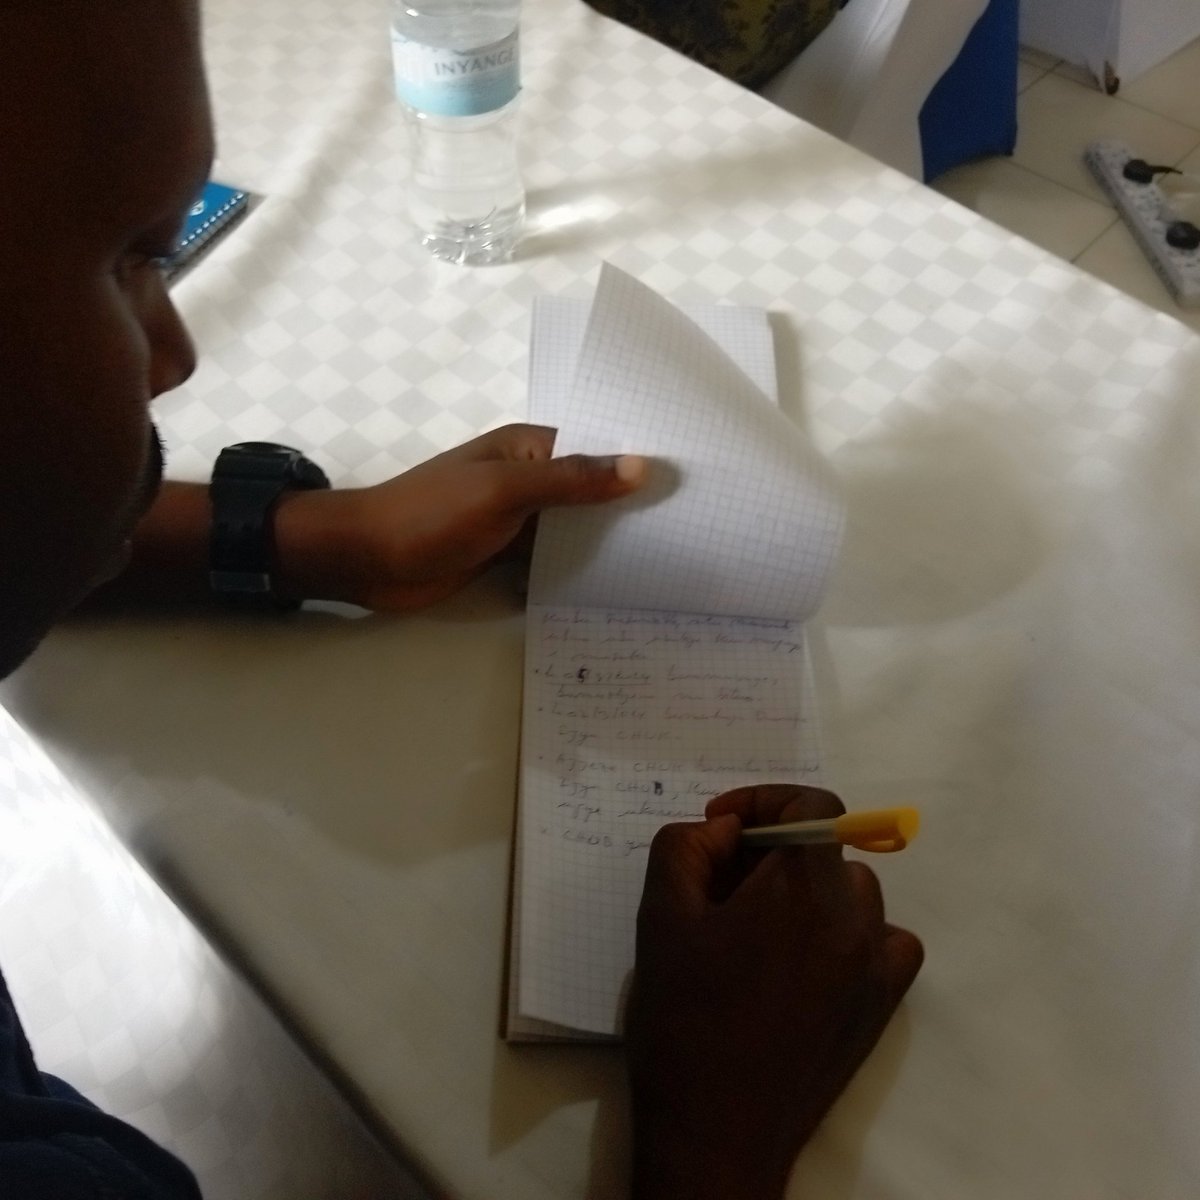 On the 4th day of the training on the techniques of investigating medical malpractice cases, trainees are given a scenario of medical malpractice cases to investigate by the facilitator from @RIB_Rw , so as to practice what they have been learning from Monday @RwandaHealth